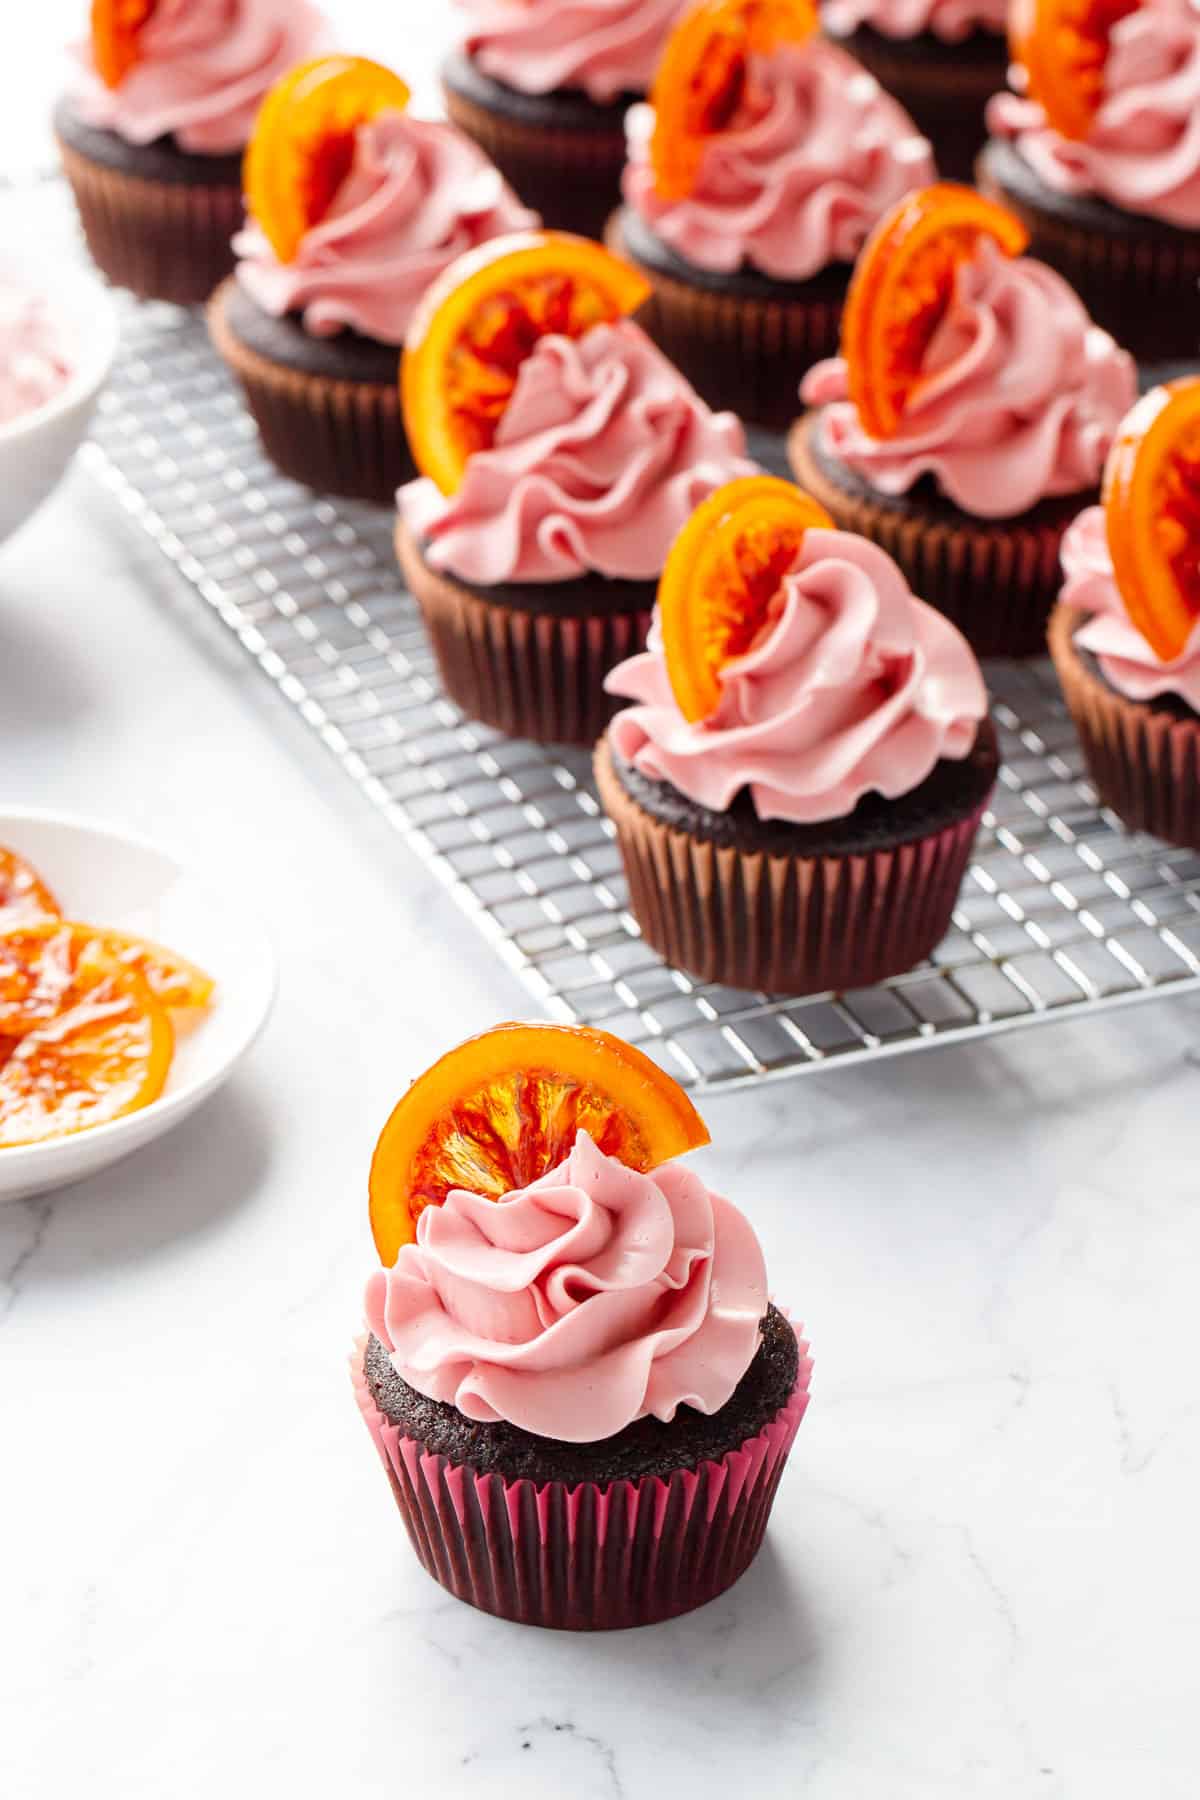 Chocolate Olive Oil & Blood Orange Cupcakes on a marble background, with a cooling rack topped with neat rows of more cupcakes in the background.